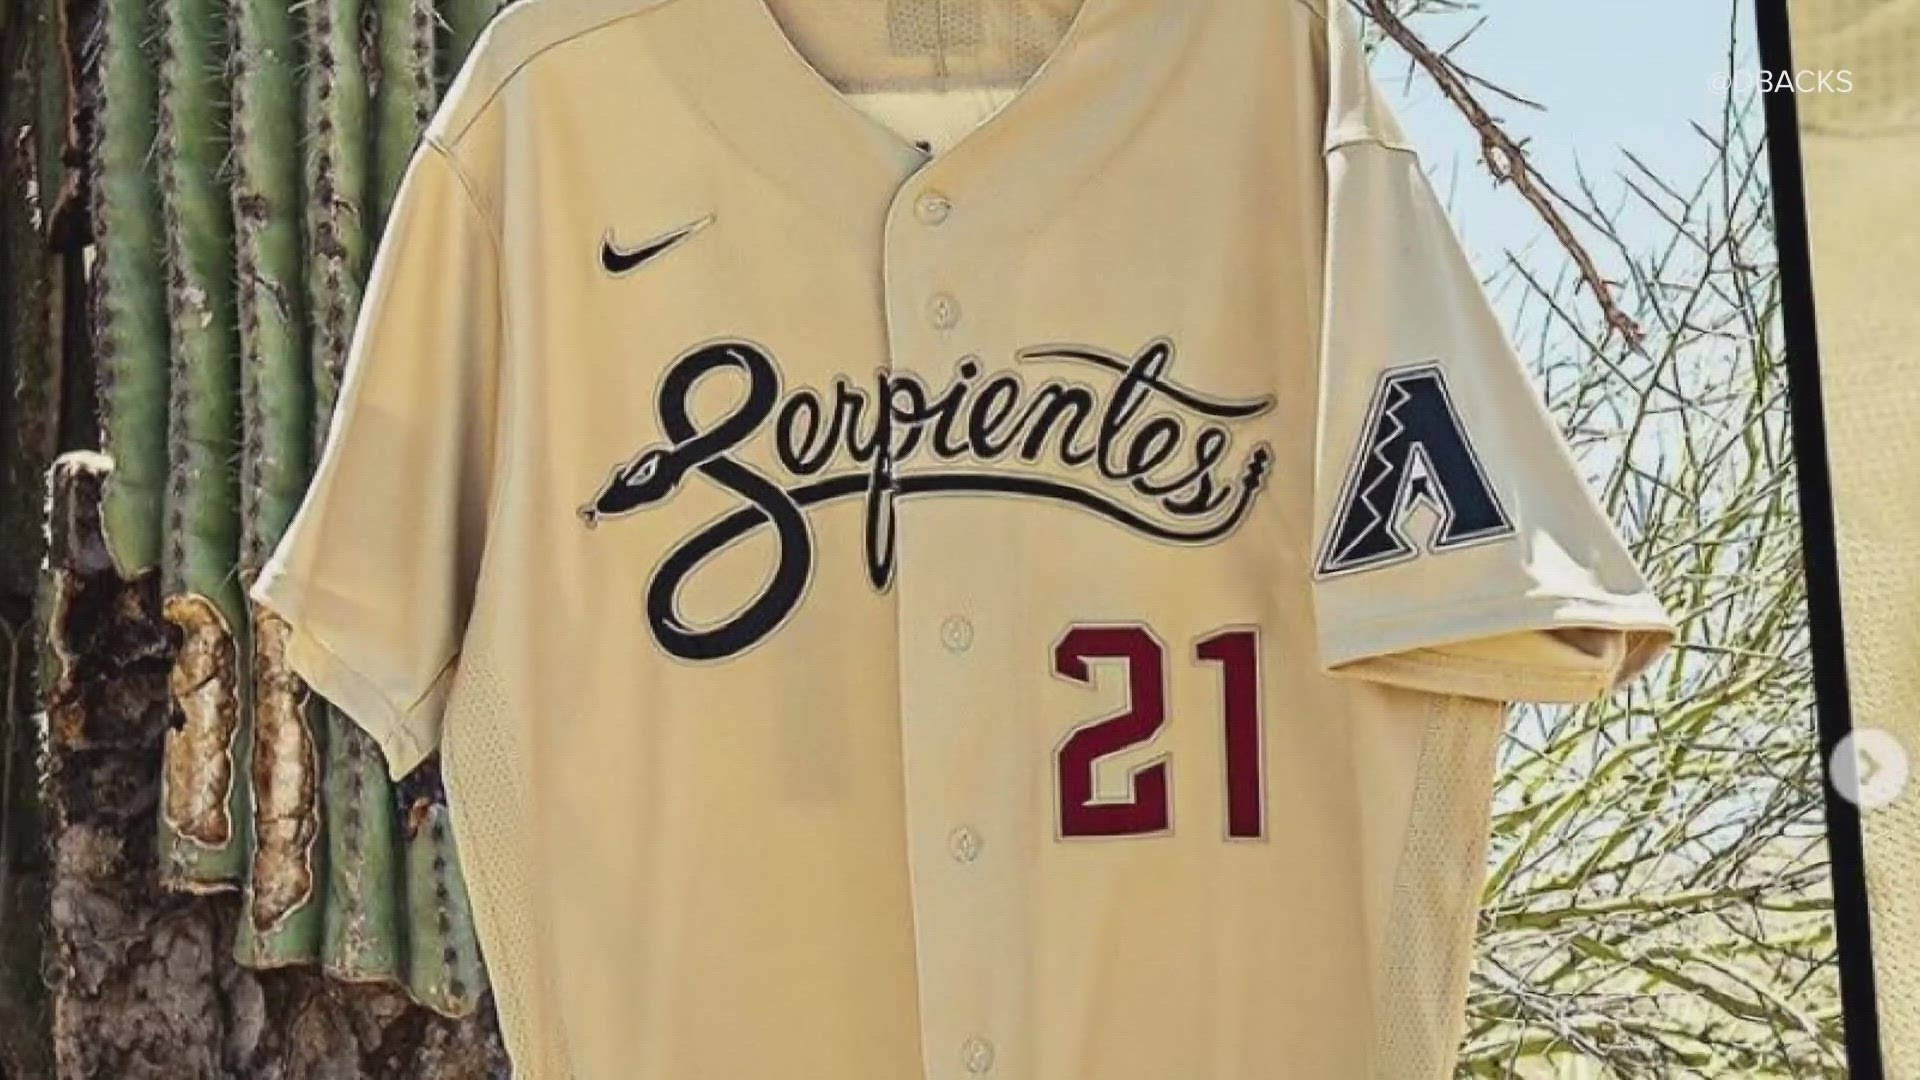 The D-backs 'Serpientes' City Connect jerseys are a big hit among MLB fans across the country.